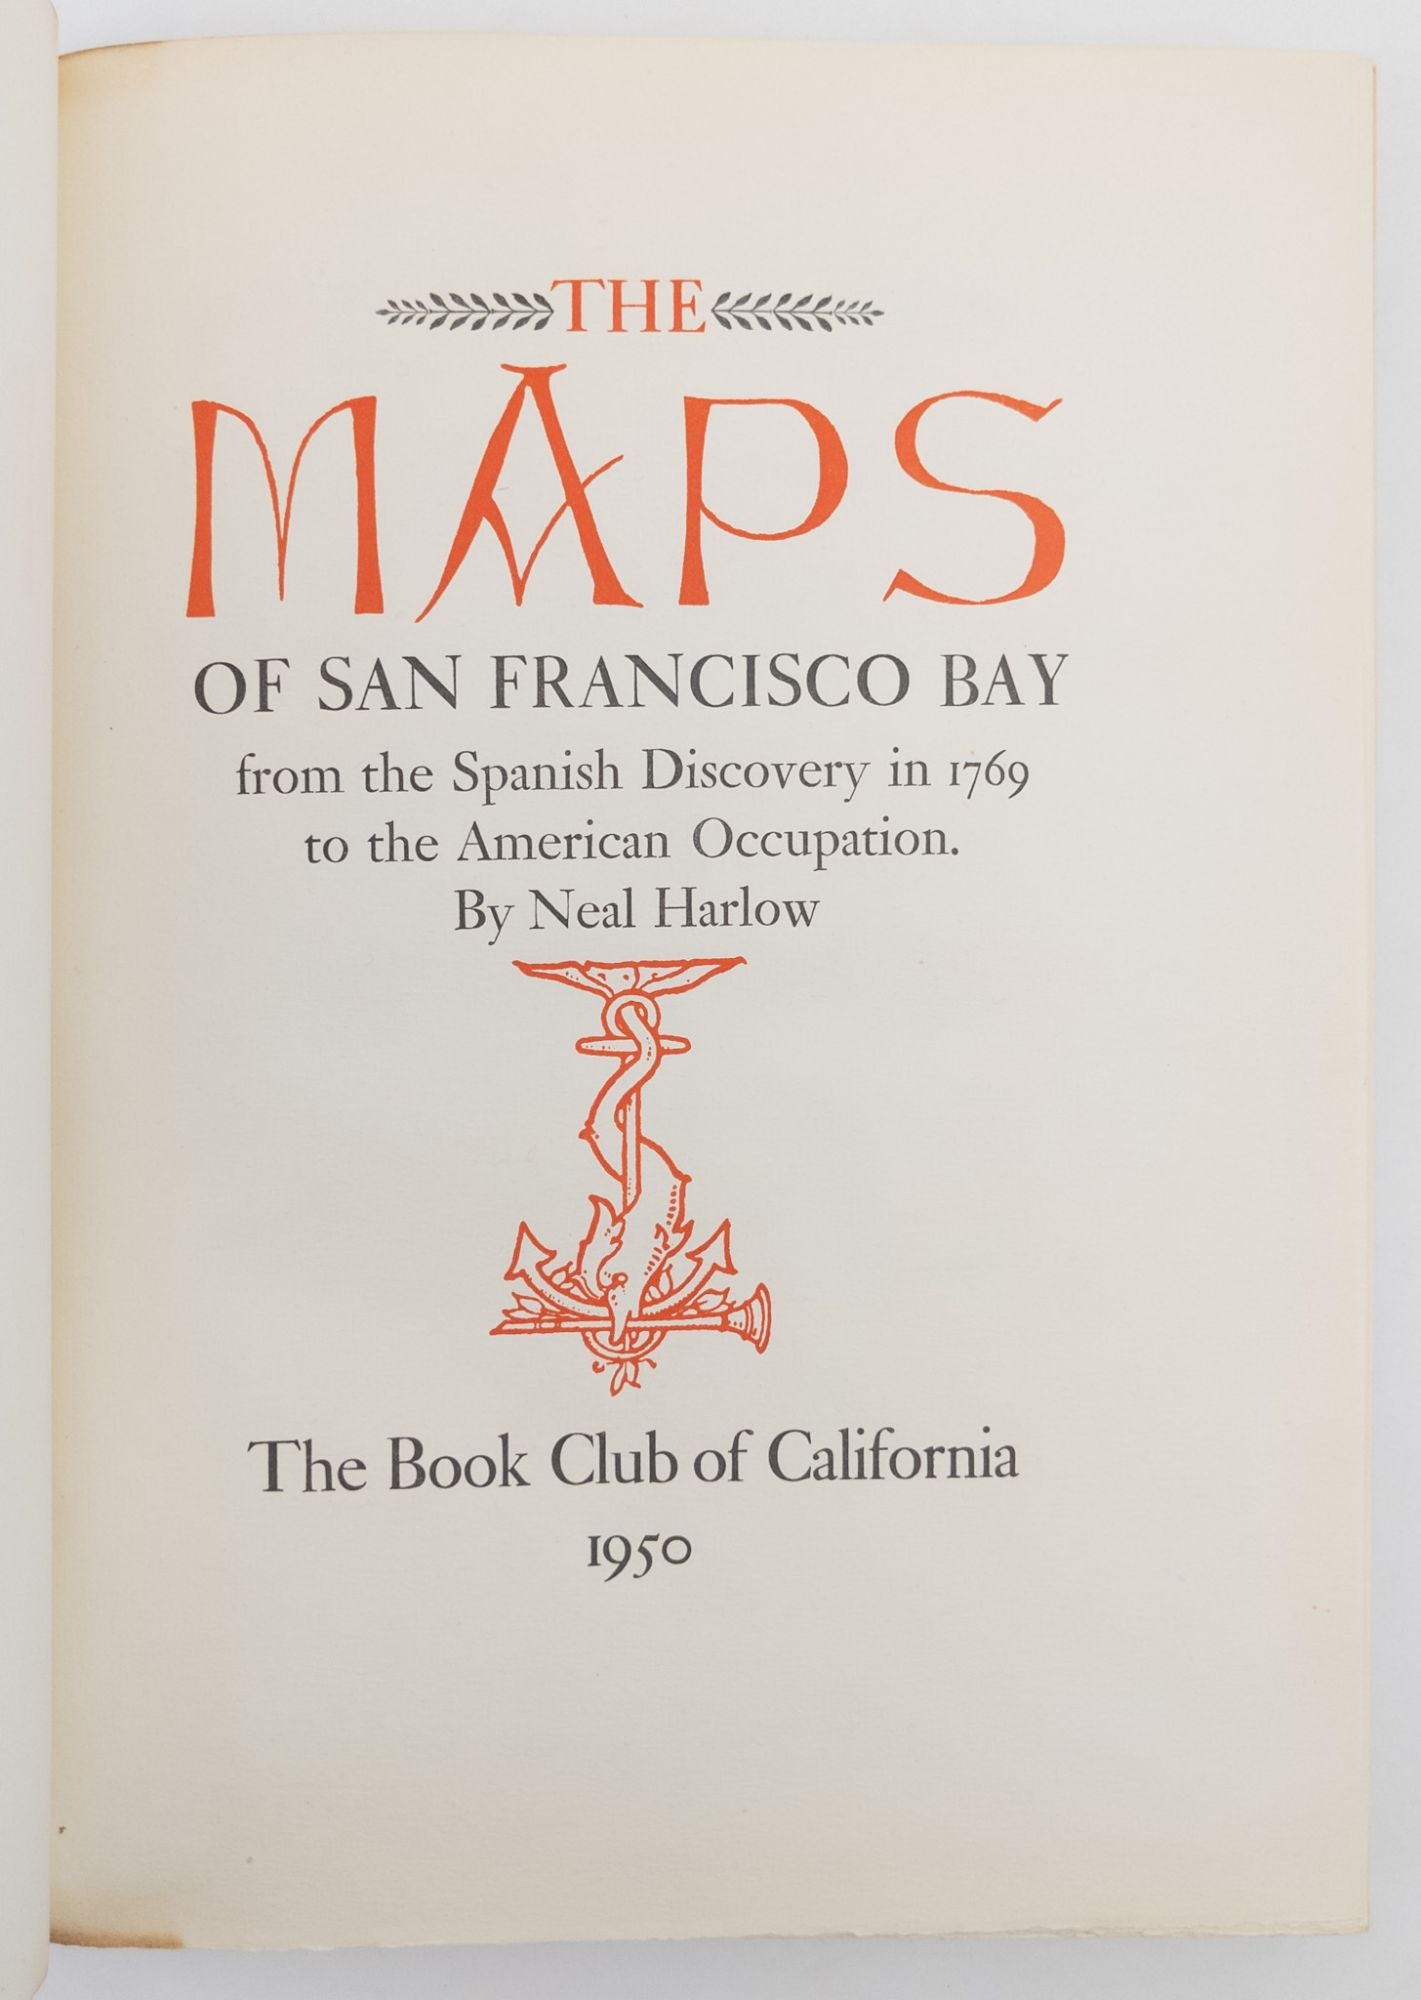 Product Image for MAPS OF SAN FRANCISCO BAY FROM THE SPANISH DISCOVERY